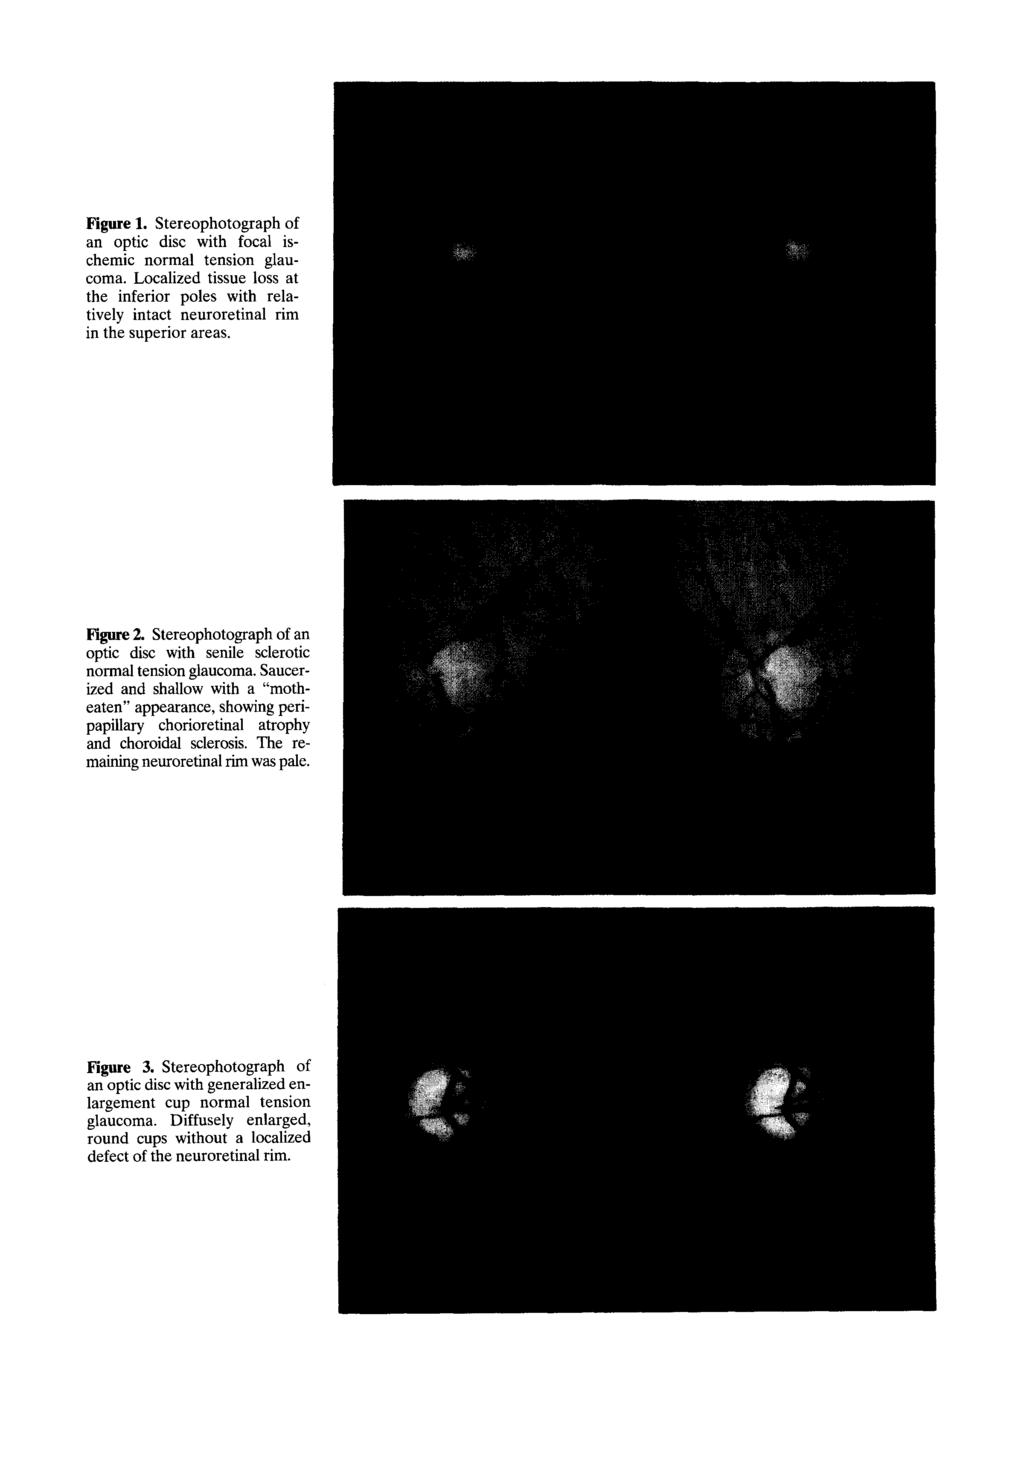 Figure 1. Stereophotograph of an optic disc with focal ischemic normal tension glaucoma. Localized tissue loss at the inferior poles with relatively intact neuroretinal rim in the superior areas.